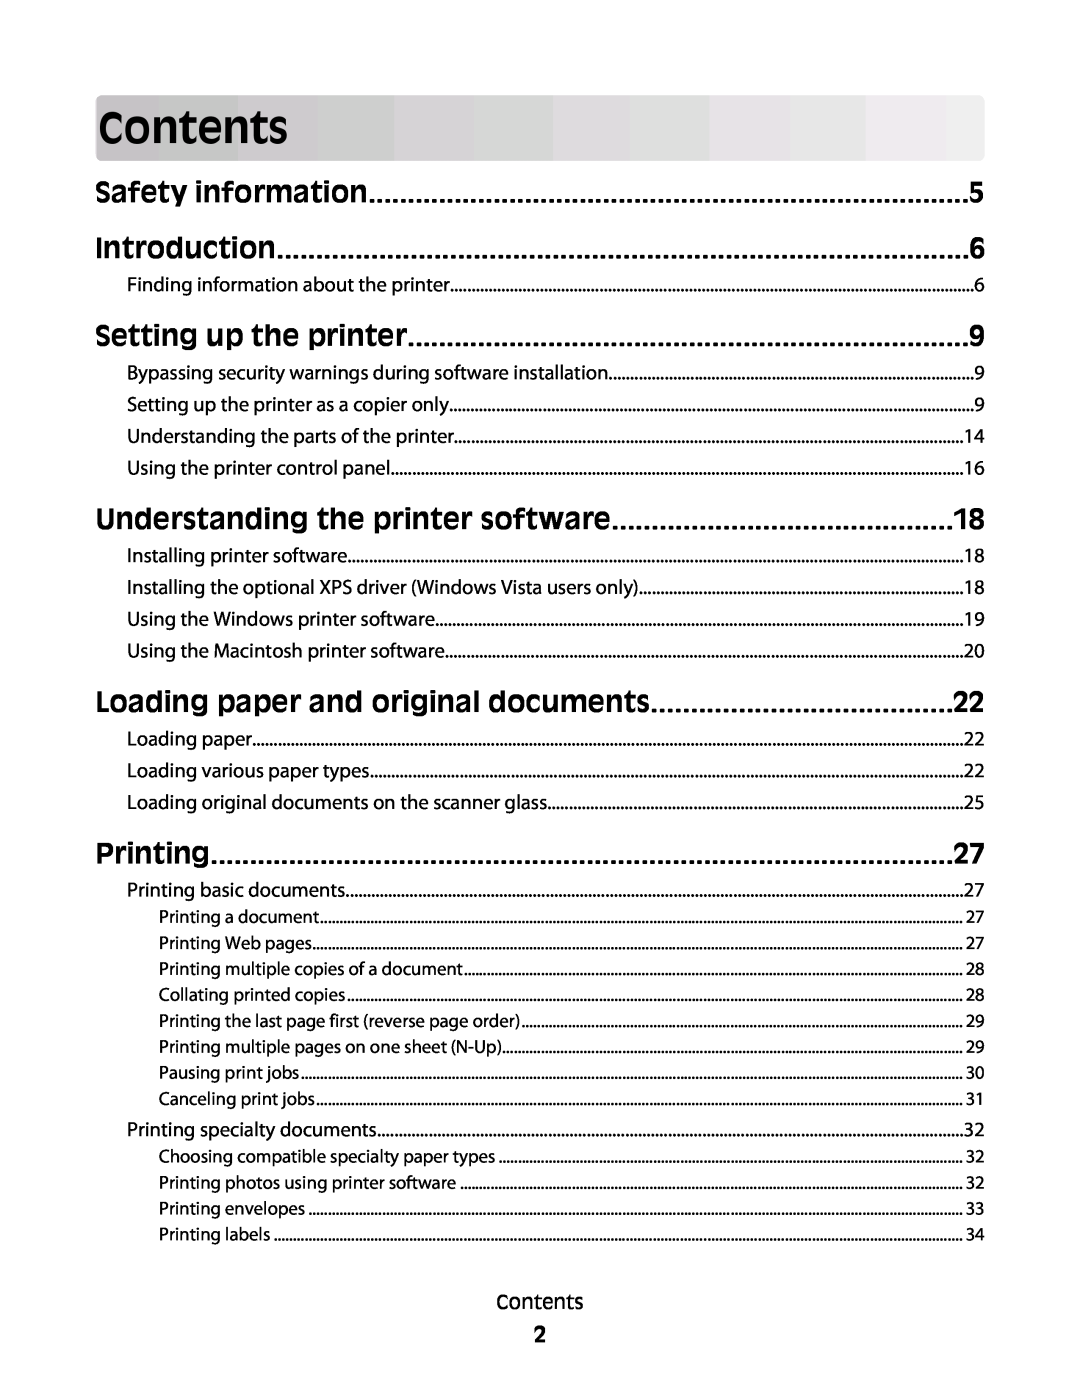 Lexmark 4433, 4445 manual Contents, Safety information, Setting up the printer, Understanding the printer software, Printing 